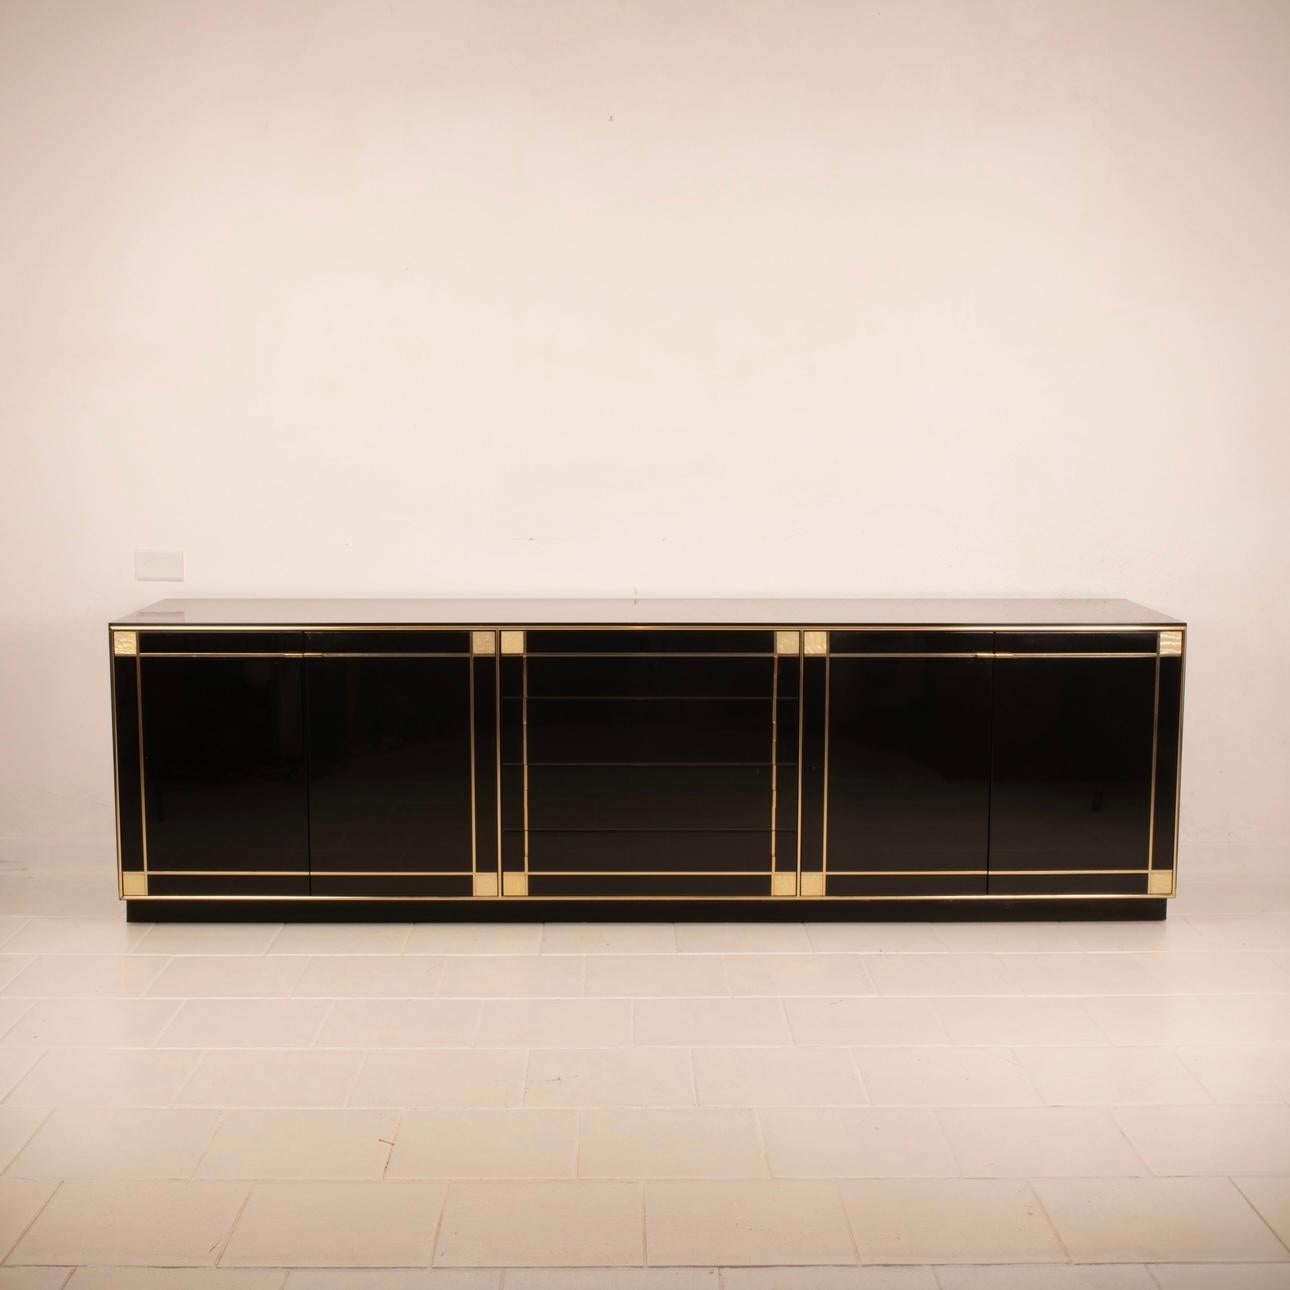 Extraordinary vintage Pierre Cardin sideboard, an authentic work of design art, produced by Roche Bobois in black lacquered wood, mother-of-pearl and brass. With its bold brass lines and glossy black lacquer, this sideboard embodies the elegance and